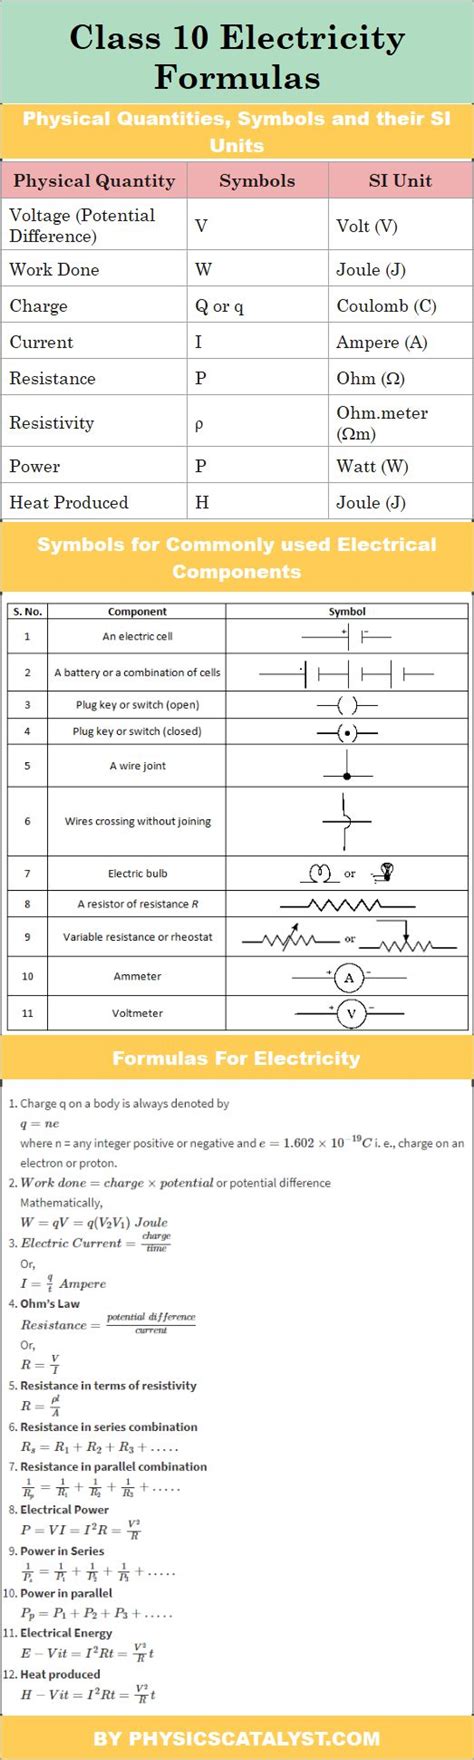 Class 10 Electricity Formulas Chemistry Lessons Study Flashcards